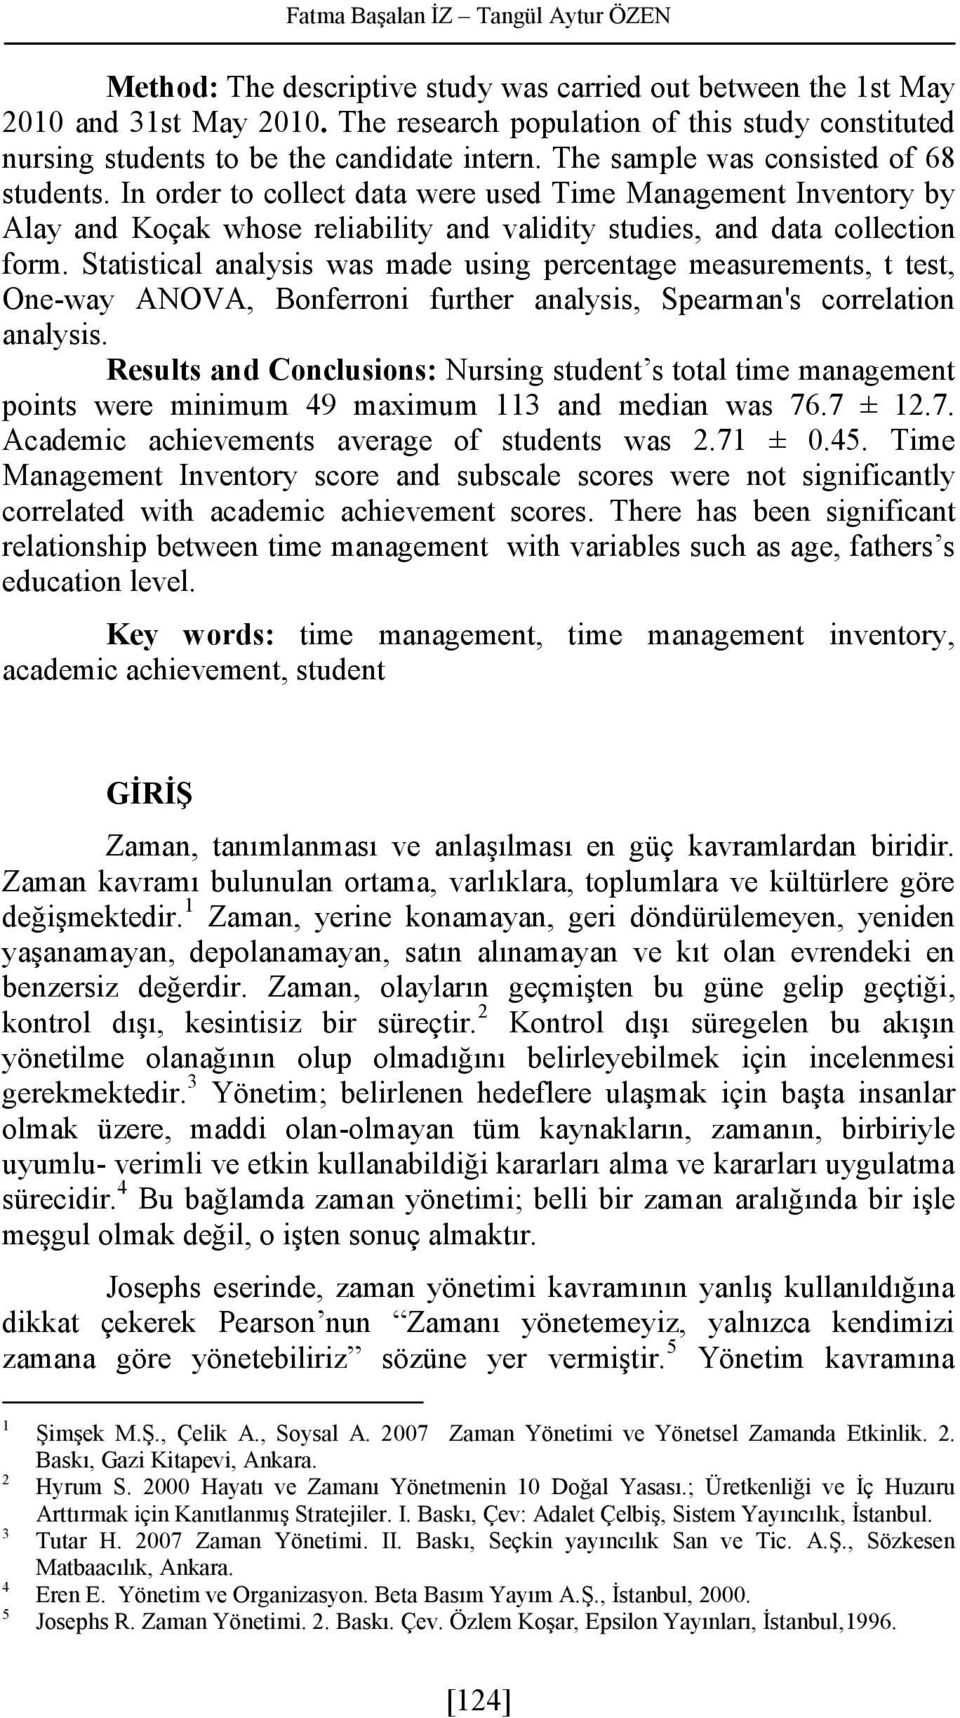 In order to collect data were used Time Management Inventory by Alay and Koçak whose reliability and validity studies, and data collection form.